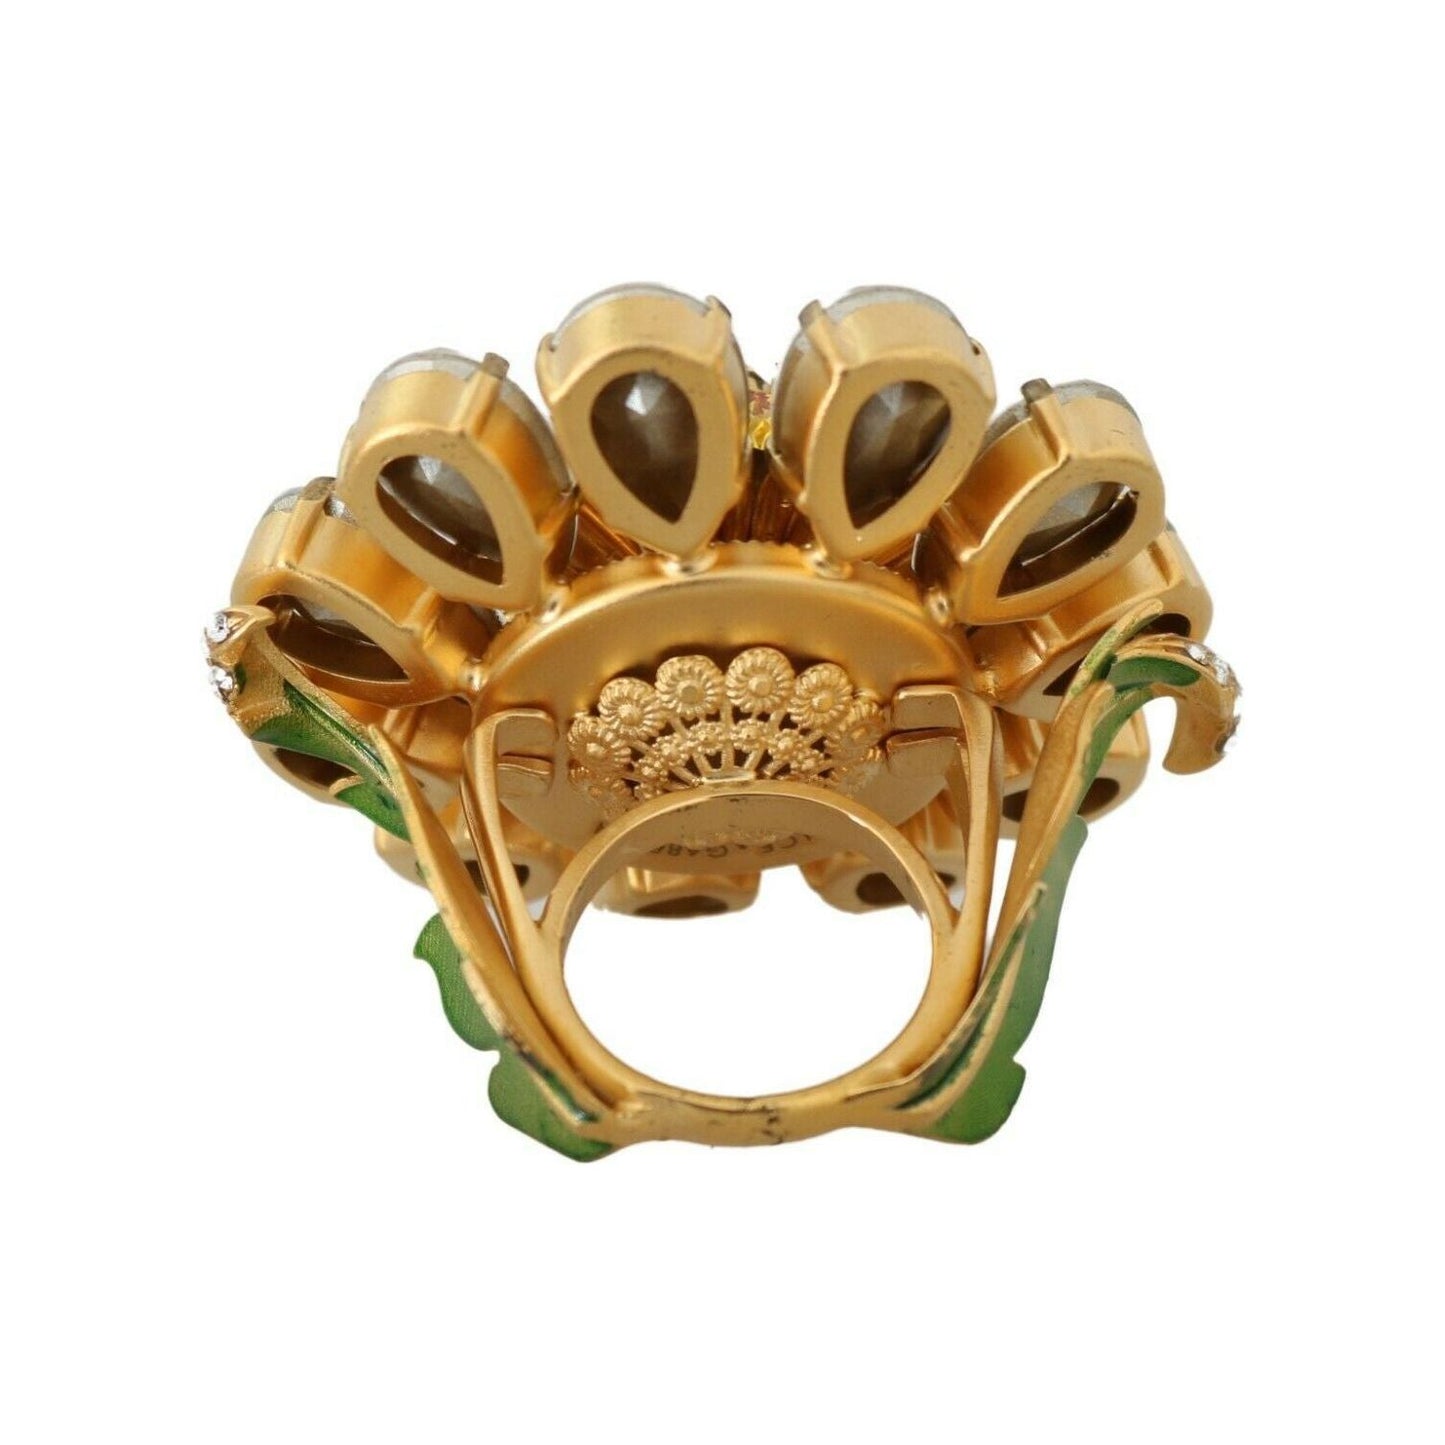 Dolce & Gabbana Crystal Flower Statement Ring Size US 7.5 gold-brass-yellow-crystal-flower-ring s-l1600-22-1-a352a2f1-e32.jpg